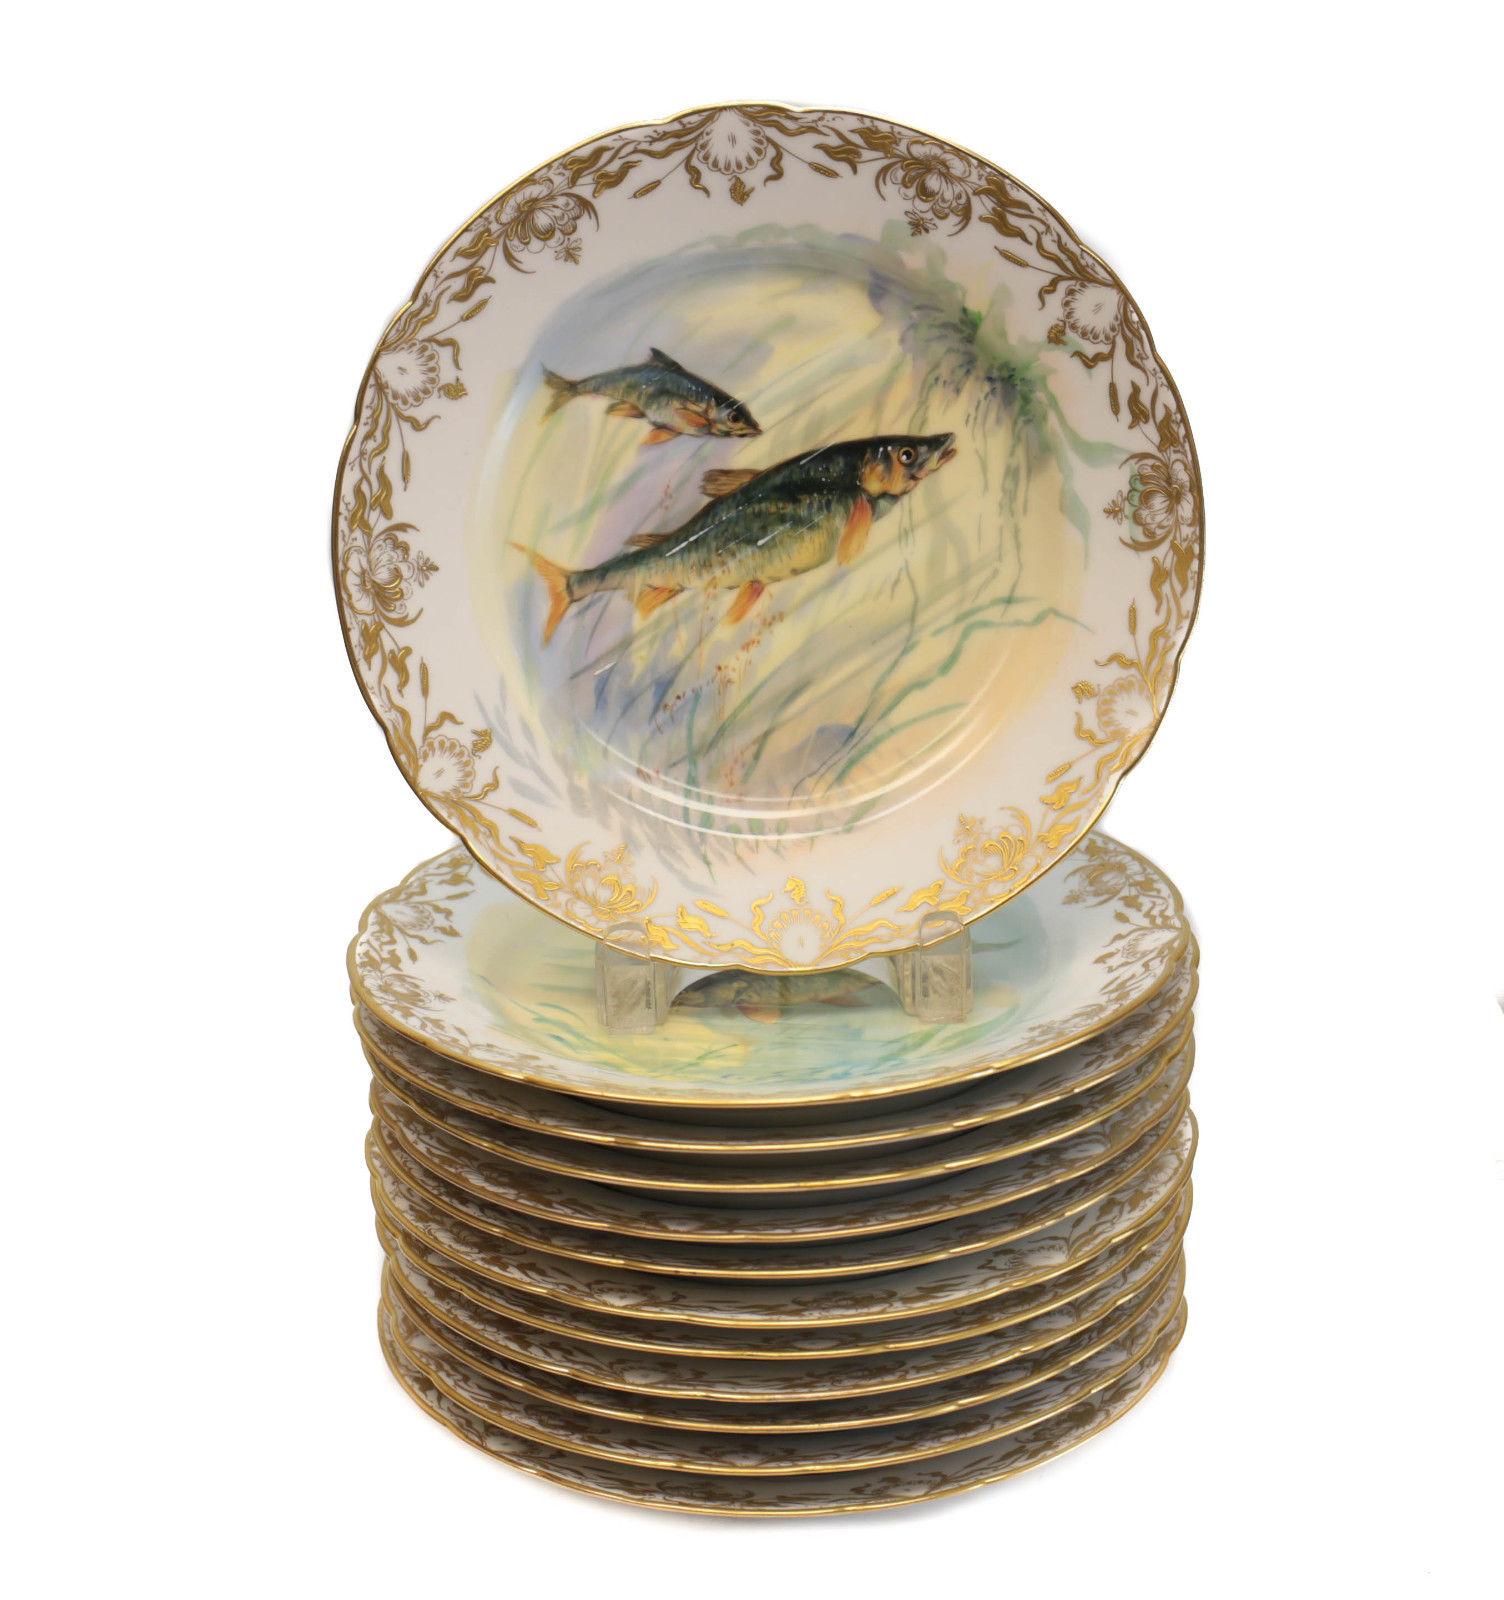 Dresden Ambrosius Lamm hand painted porcelain fish service for 12. Various hand painted fish to the center of the plates and to the fish tray. Gilt seaweed designs to the rim of the plates. Dresden Ambrosius Lamm marks to the underside base. Weight